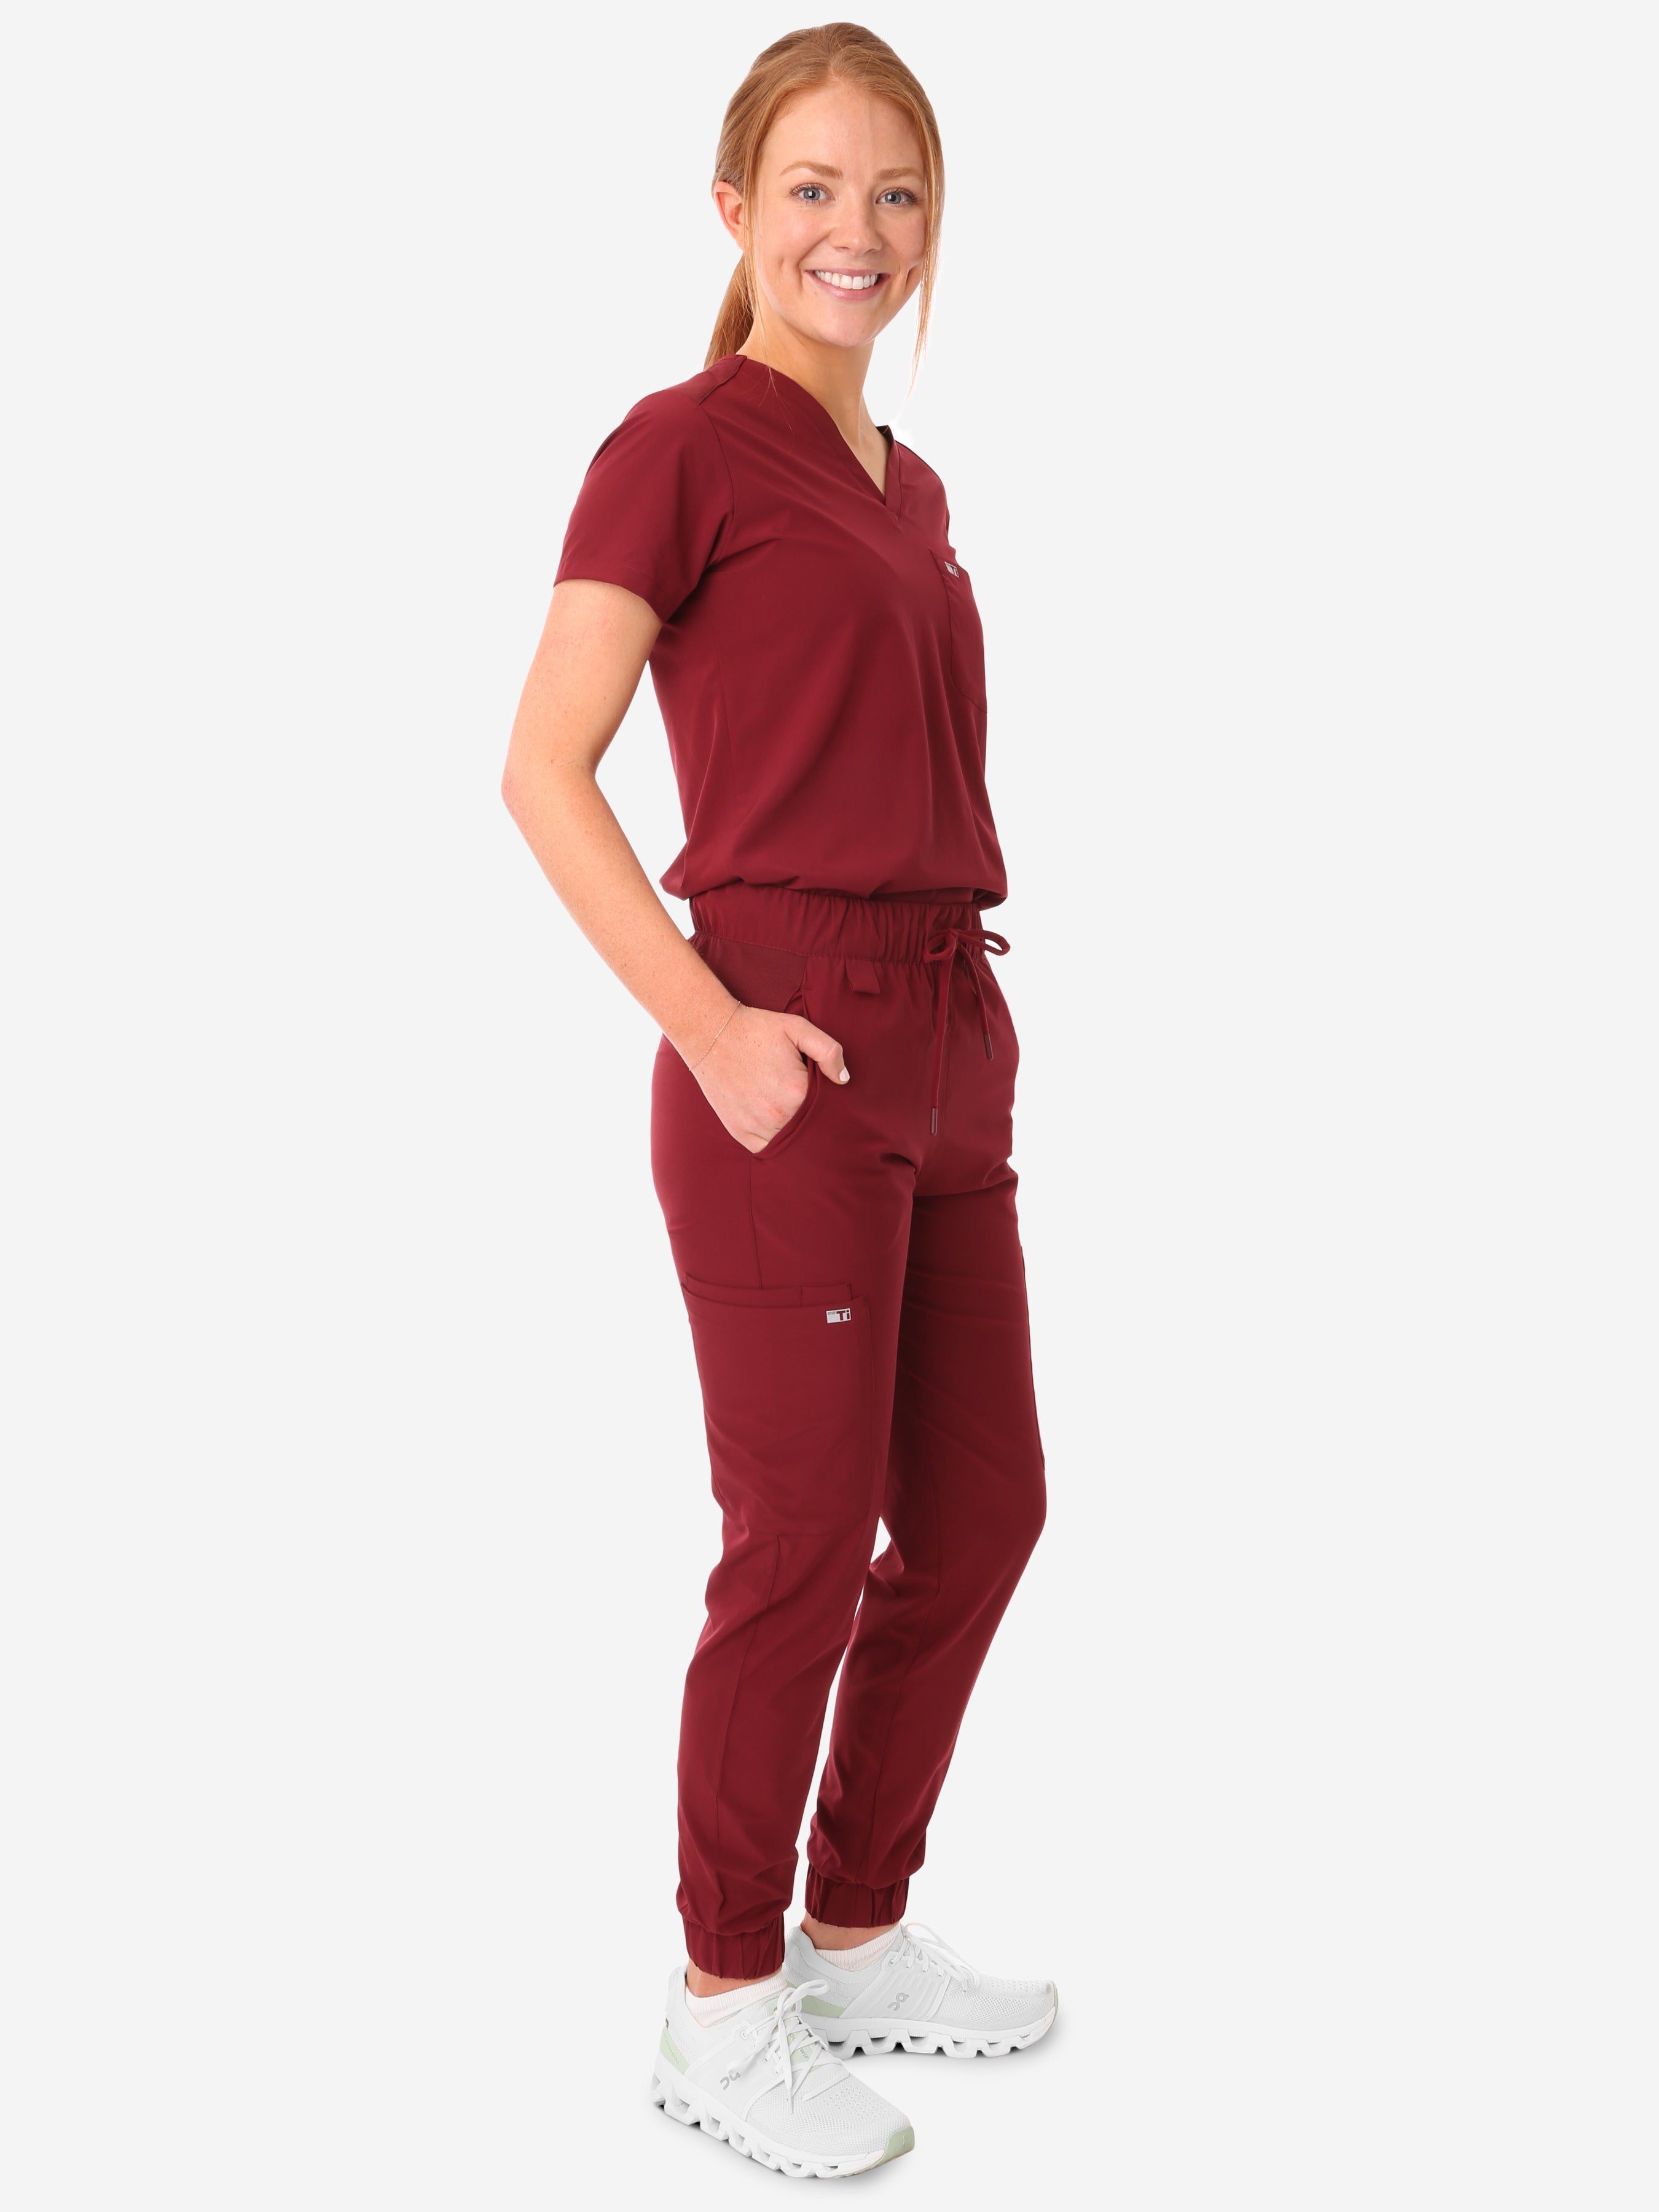 TiScrubs Bold Burgundy Women&#39;s Stretch Perfect Jogger Pants and One-Pocket Tuckable Top Side View Full Body